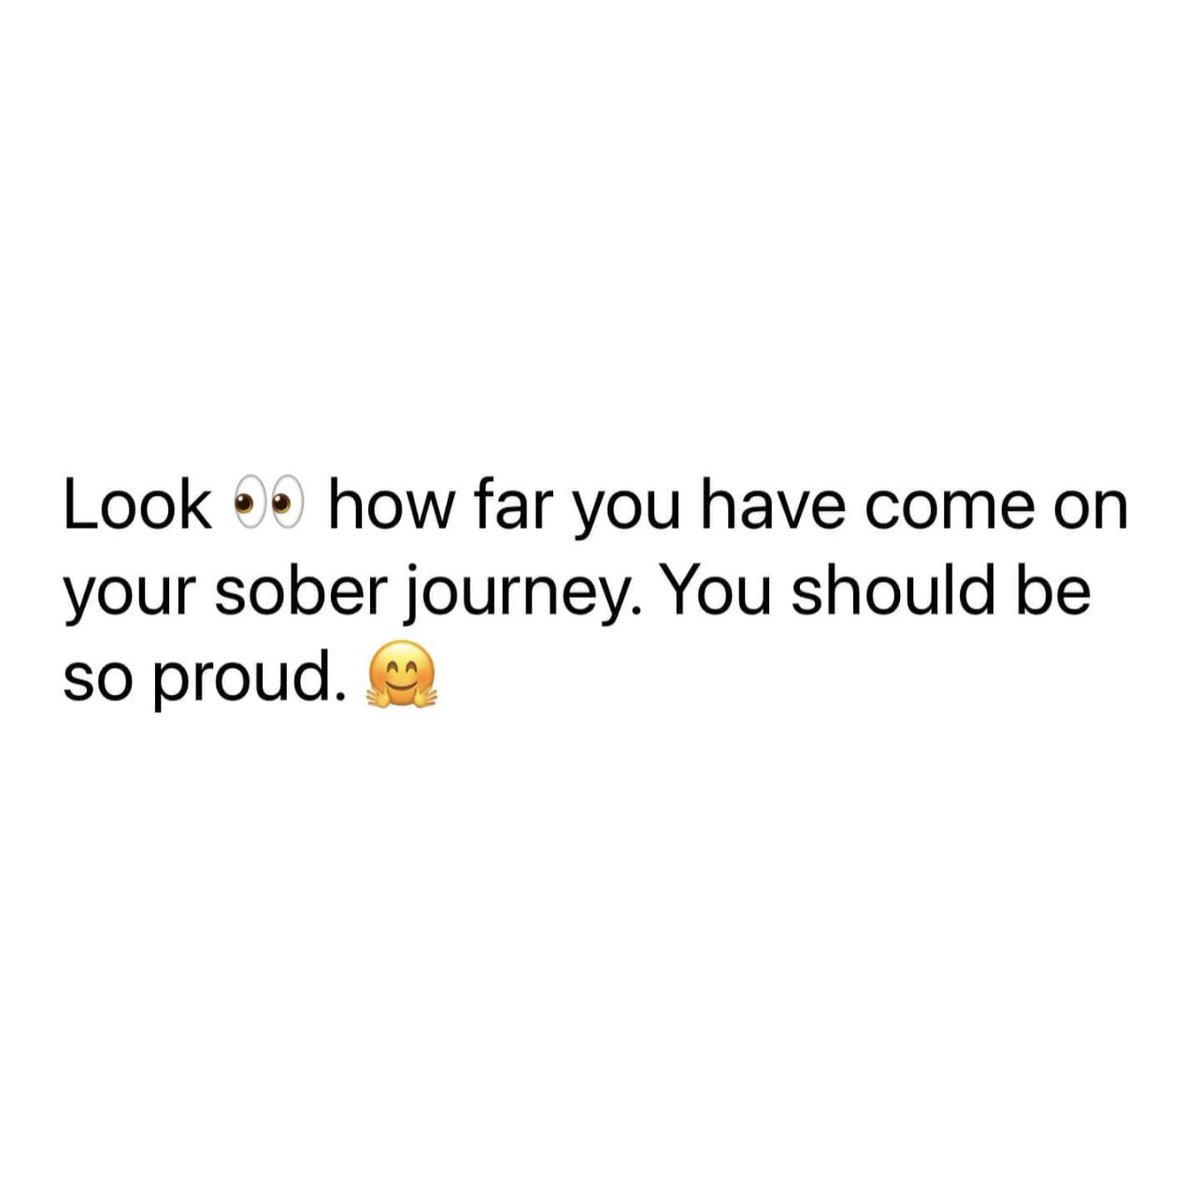 Sometimes, self recognition and self congratulations are a part of self care. 

#addiction #addiction #addictionrehab #addictionrecovery #wedorecover #coheedandcambria #opioidaddiction #opioidepidemic #opioidcrisis #drugtreatmentprogram #drugaddictionawareness #RecoveryPosse